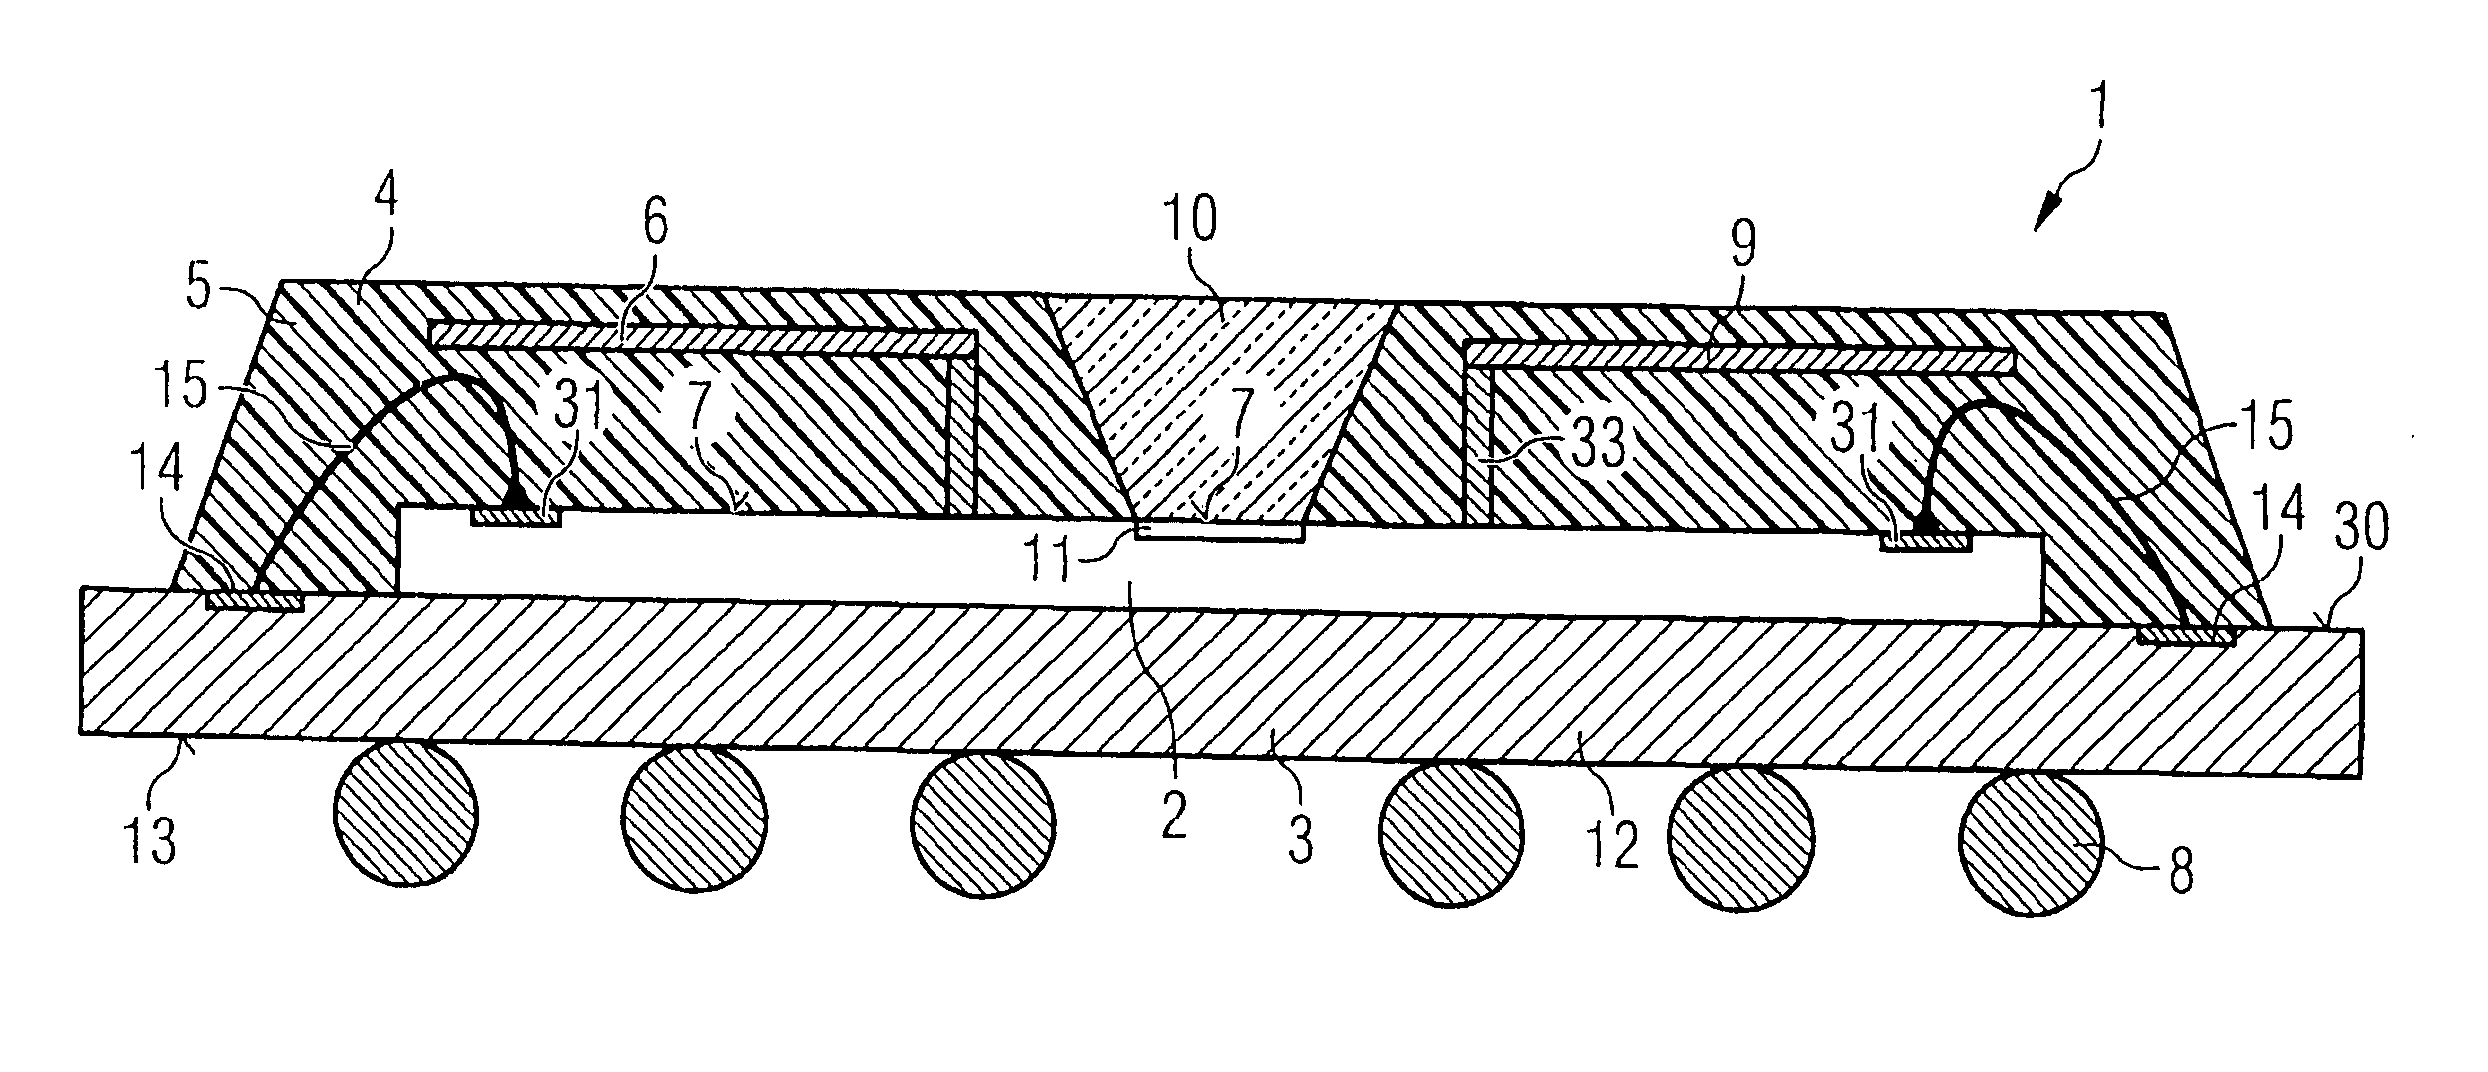 Semiconductor component and sensor component for data transmission devices